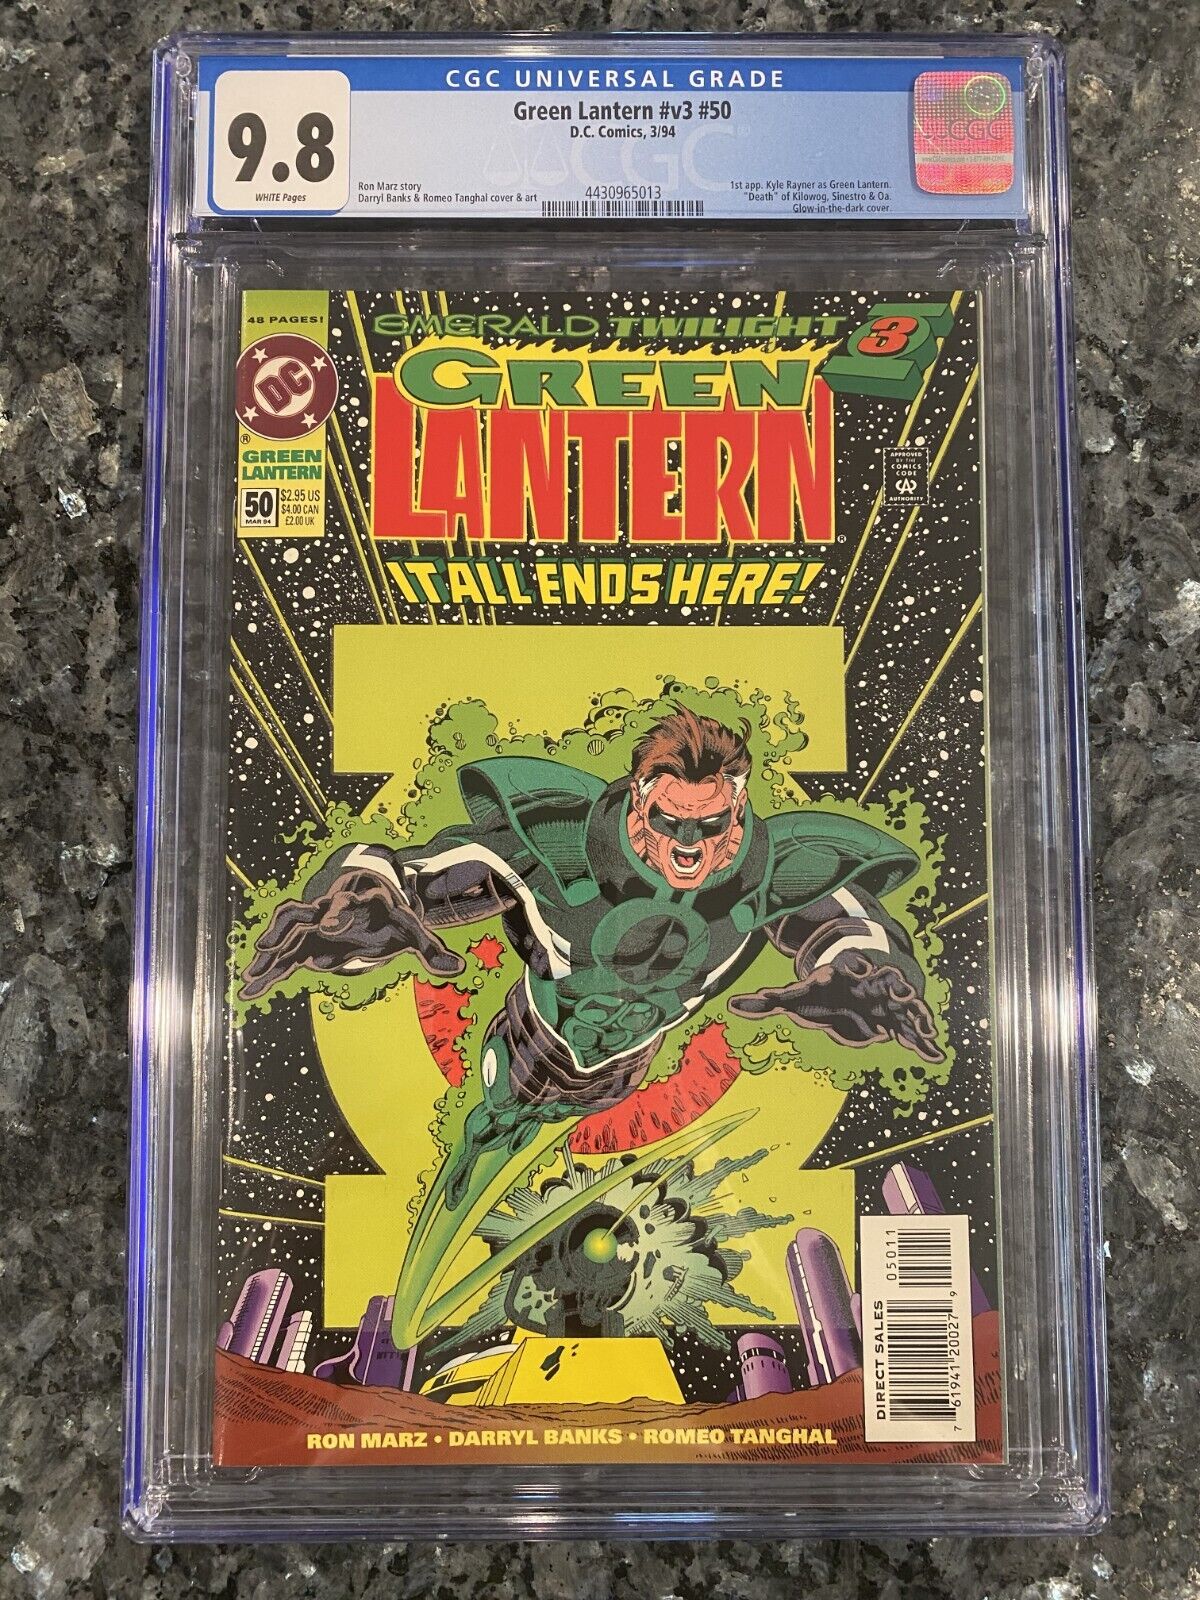 Green Lantern #50 (v3) - CGC 9.8 White Pages - Glow-in-the-Dark Cover